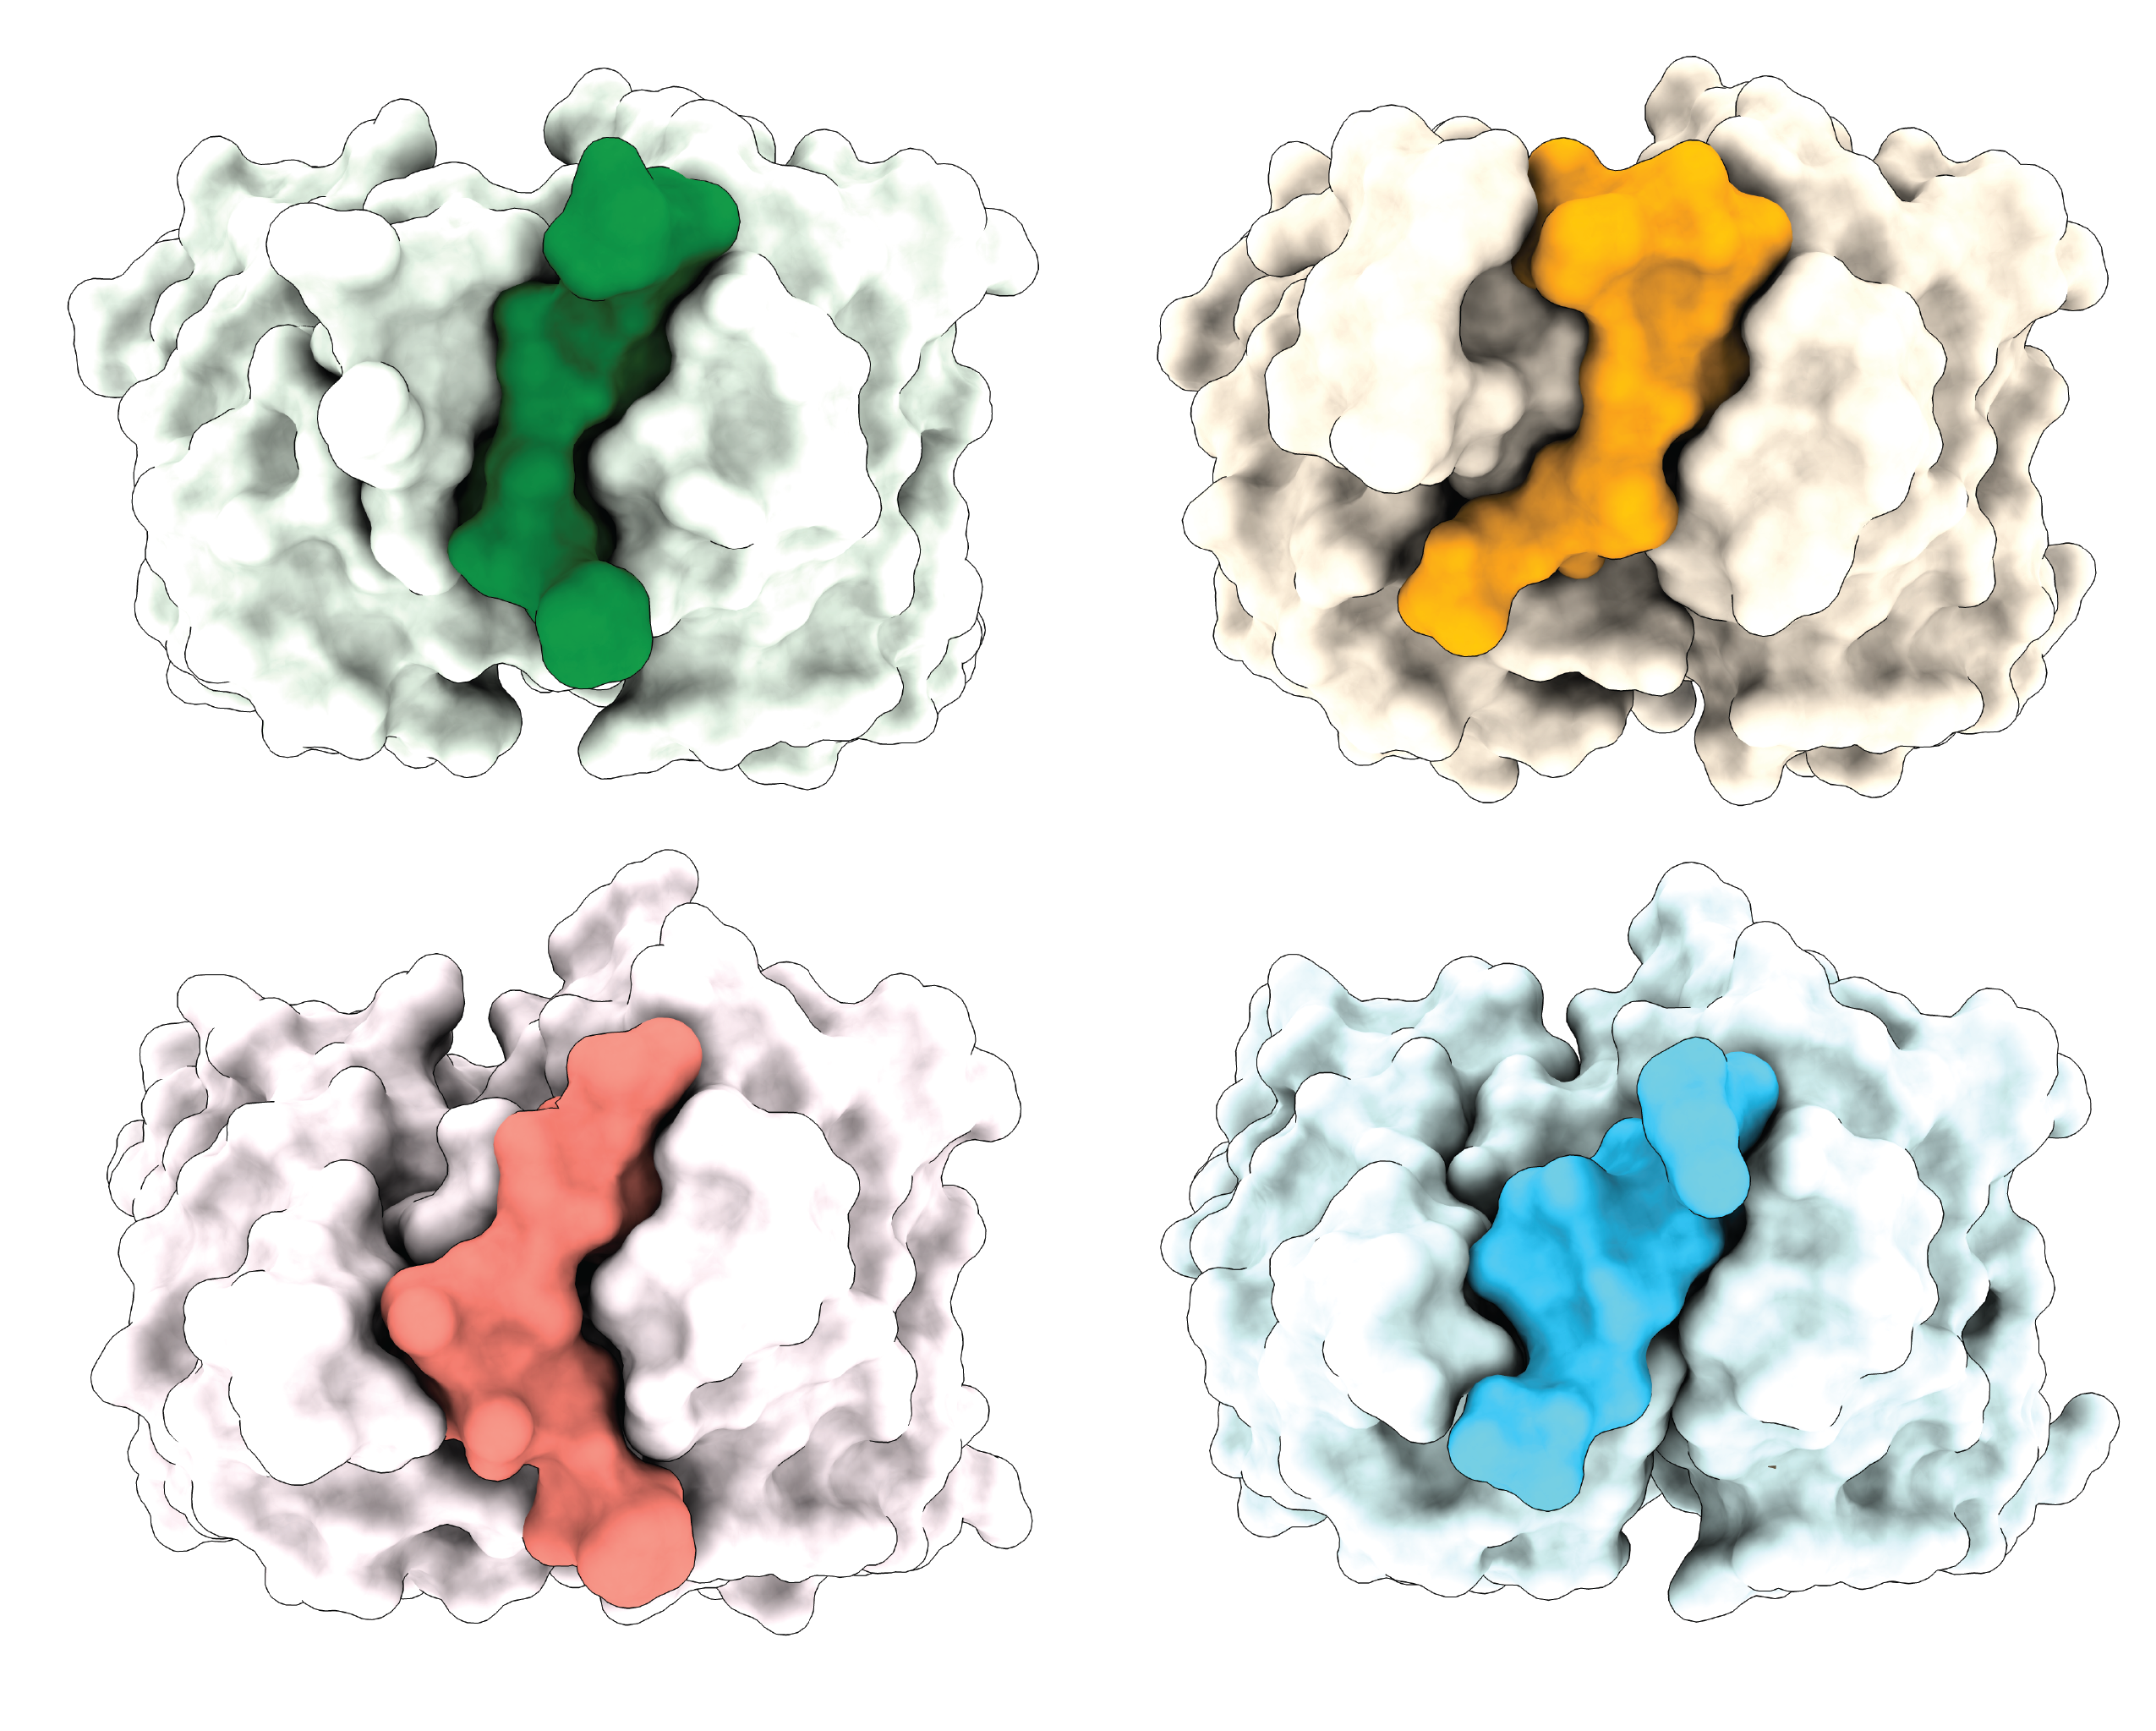 Four cloud-shaped illustrations showing the antigen bound to four different, smaller cloud-like shapes representing antibodies, colored in green, orange, pink and blue.